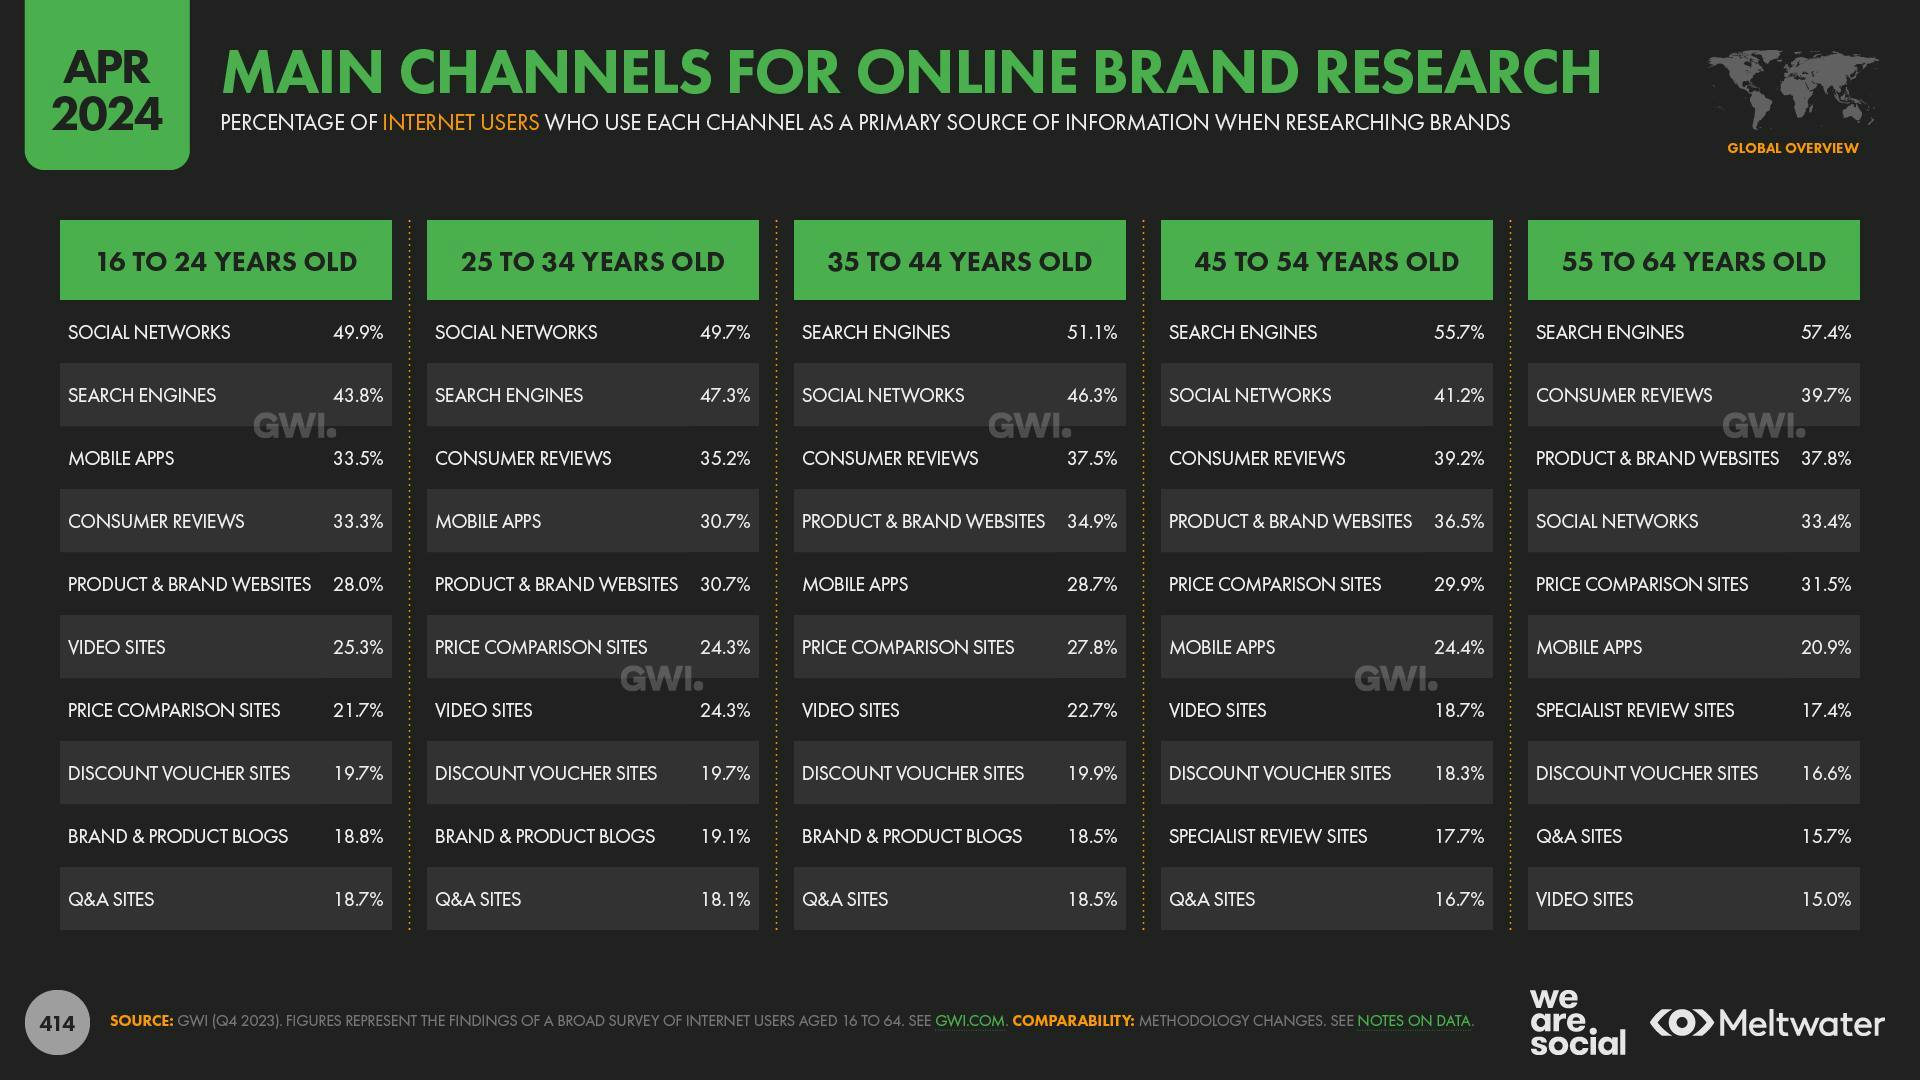 Main channels for online brand research